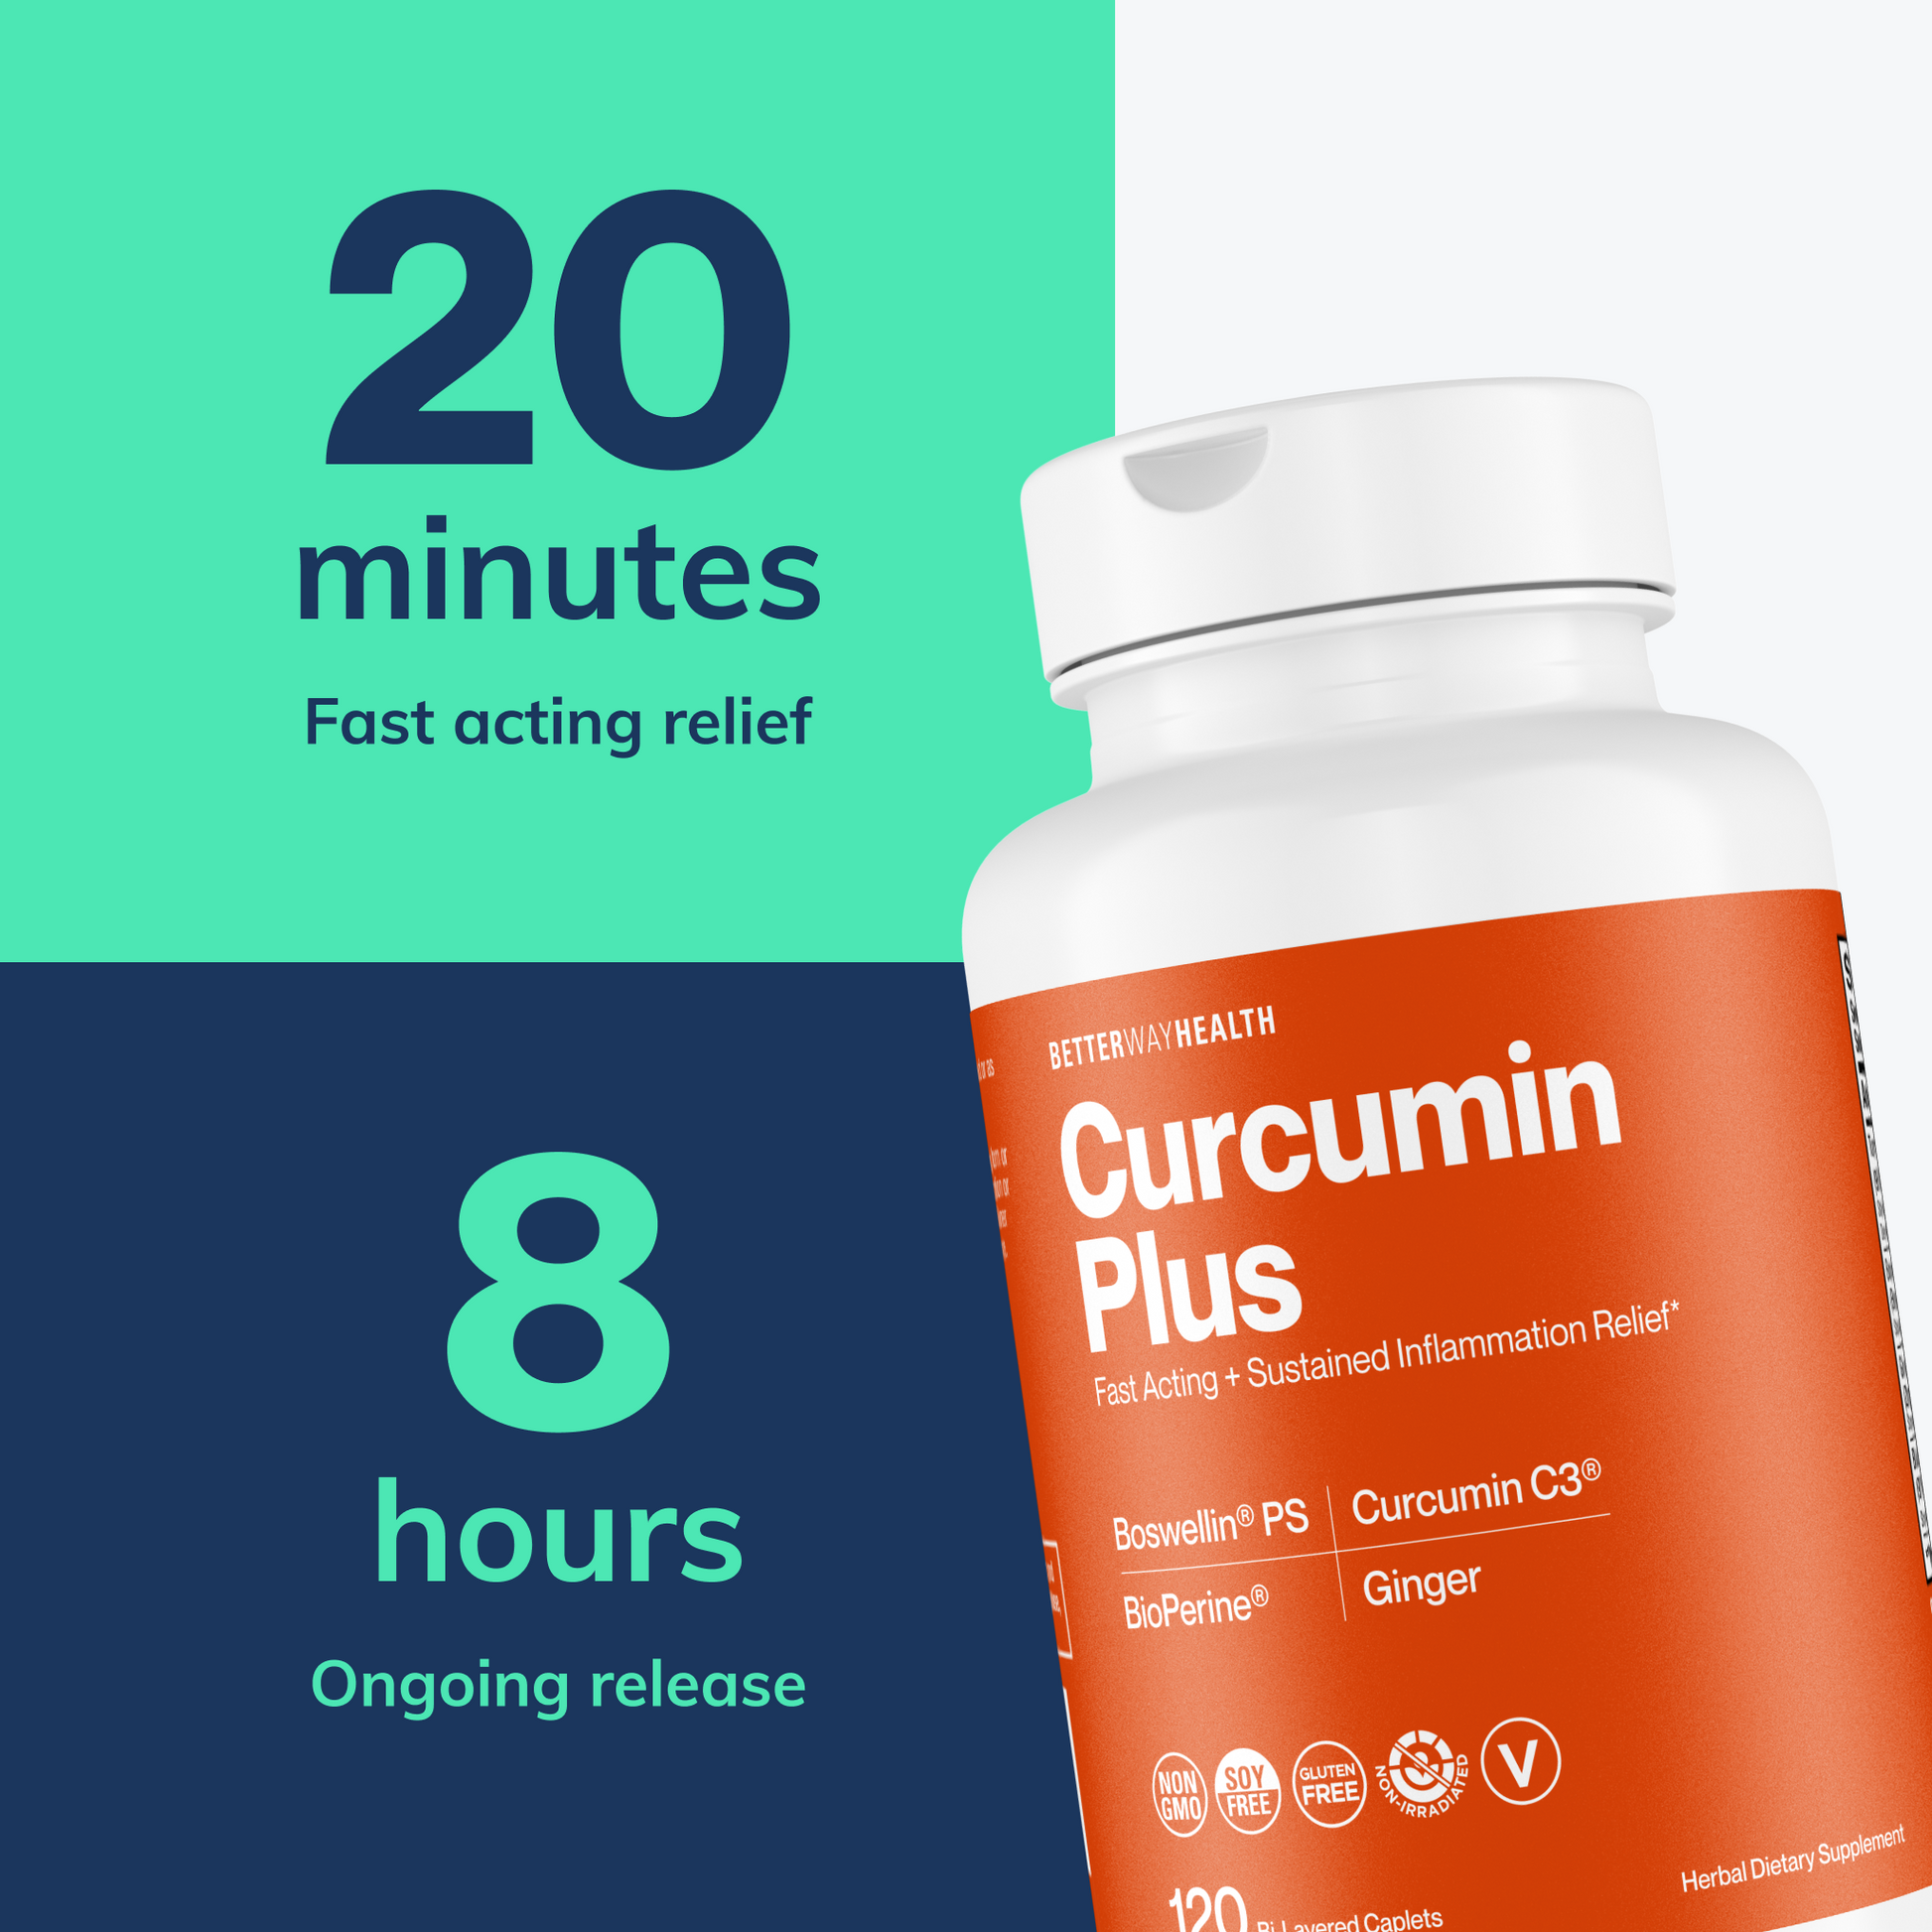 curcumin plus image 8 hours of ongoing release with 20 minutes fast active relief